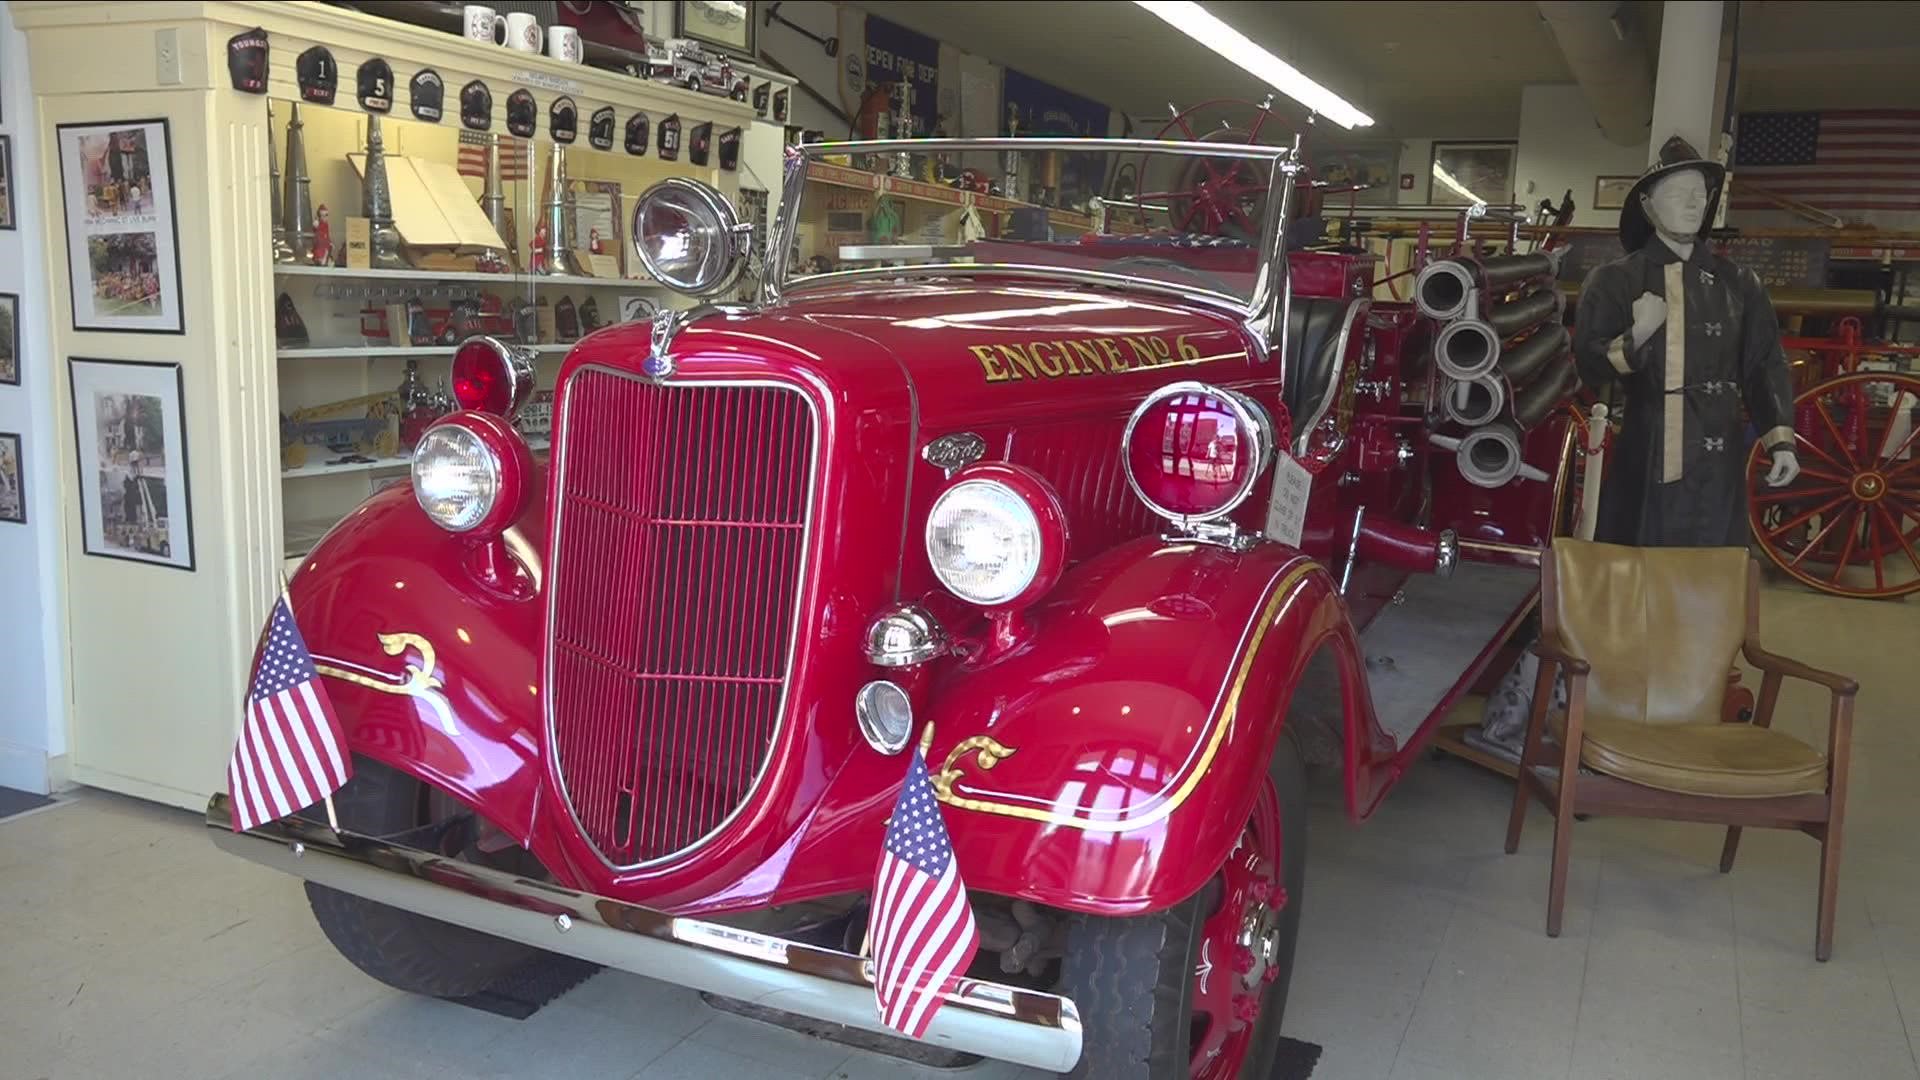 A tour of the Greater Lancaster Museum of Firefighting